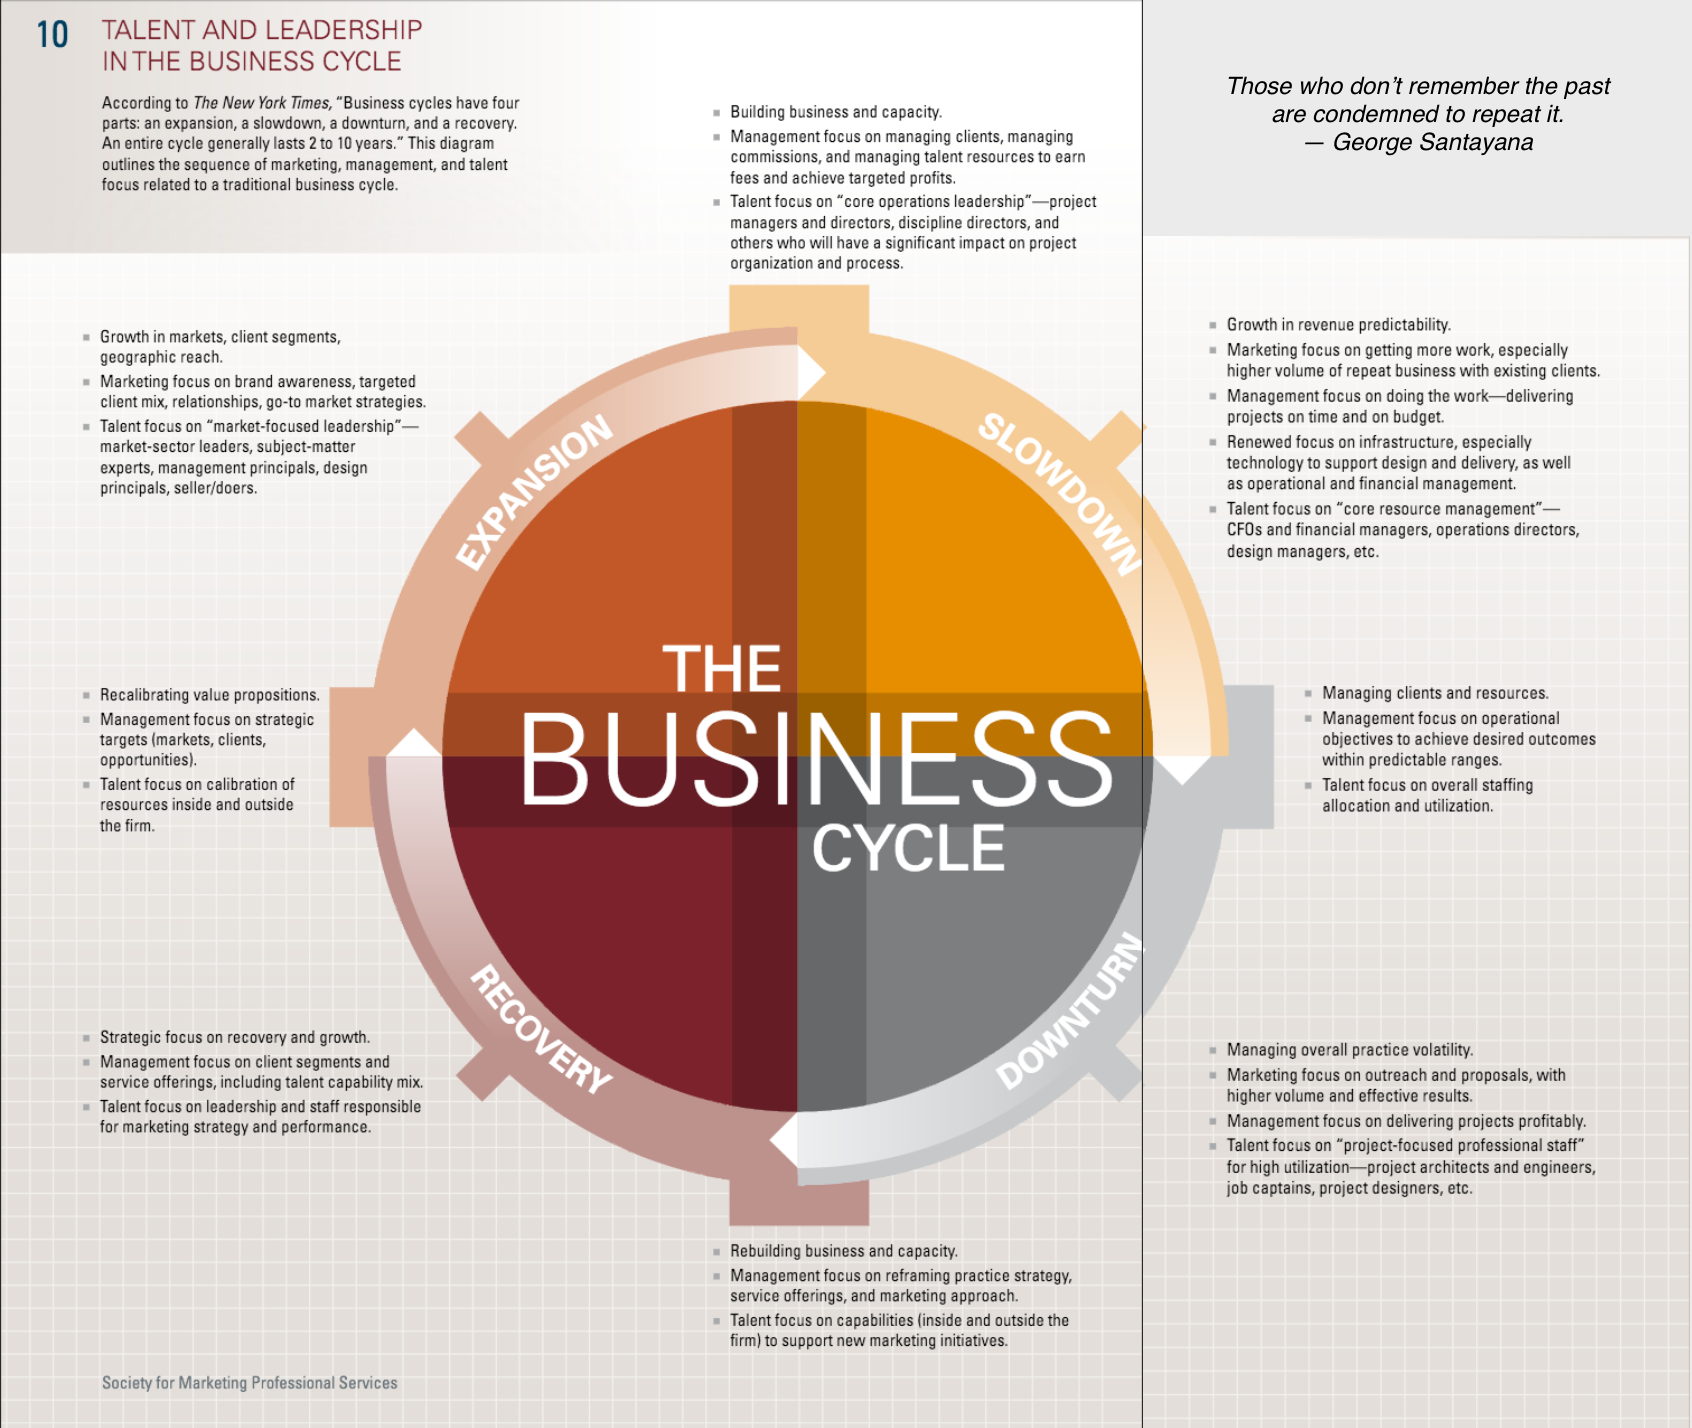 The Hinge: Talent and Leadership in the Business Cycle by Marjanne Pearson and Nancy Egan, FSMPS 